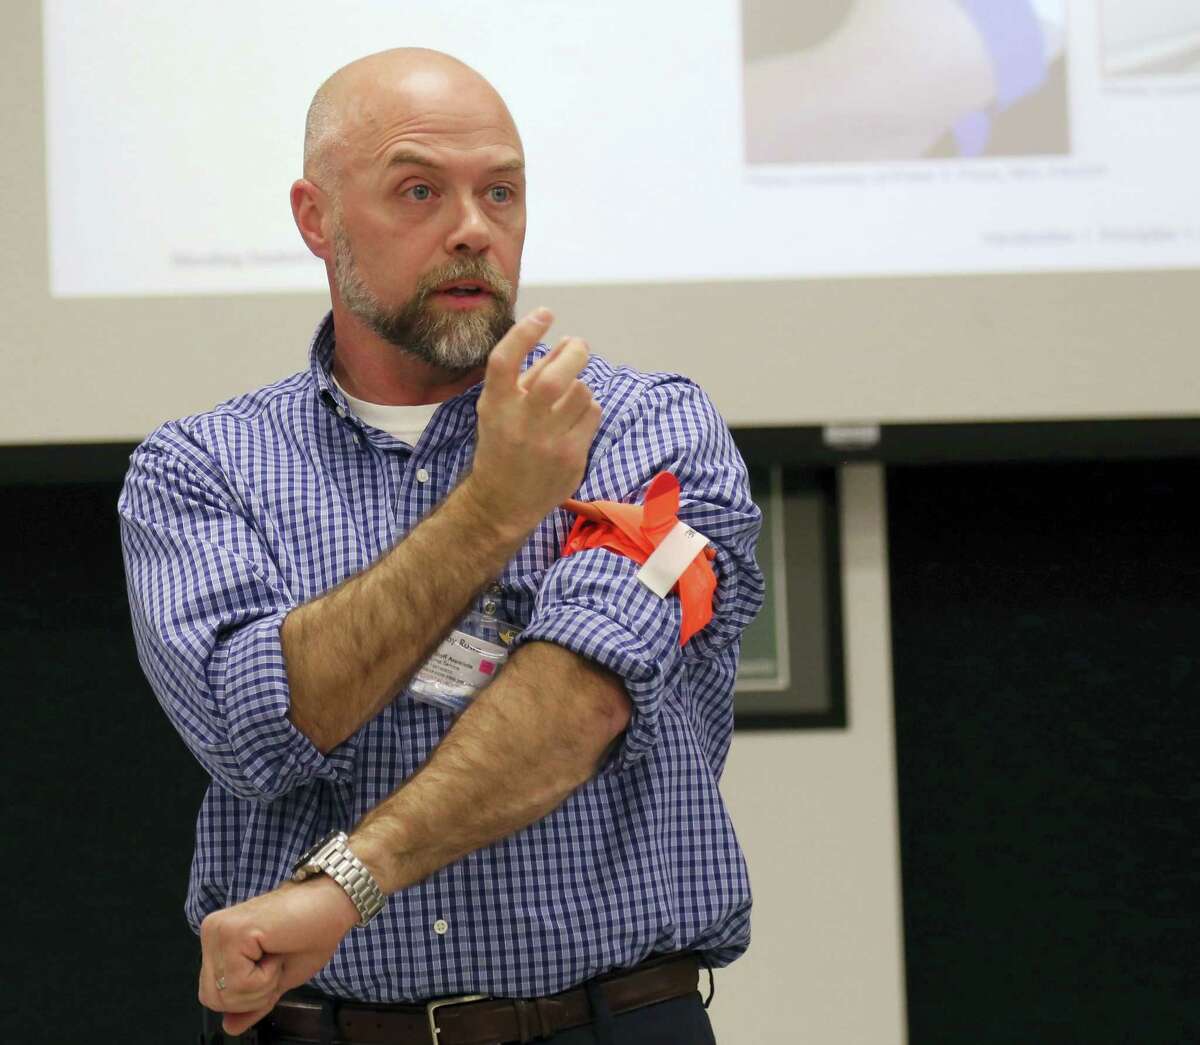 Colby Rowe, a paramedic educational coordinator for Stony Brook University Hospital’s Trauma Center, demonstrates how to apply a tourniquet during a training session for Stony Brook University administrators and security staff, Tuesda in Stony Brook, N.Y. Stony Brook University personnel were given instruction on how to treat gunshot wounds, gashes and other injuries until actual EMTs can get to the scene.